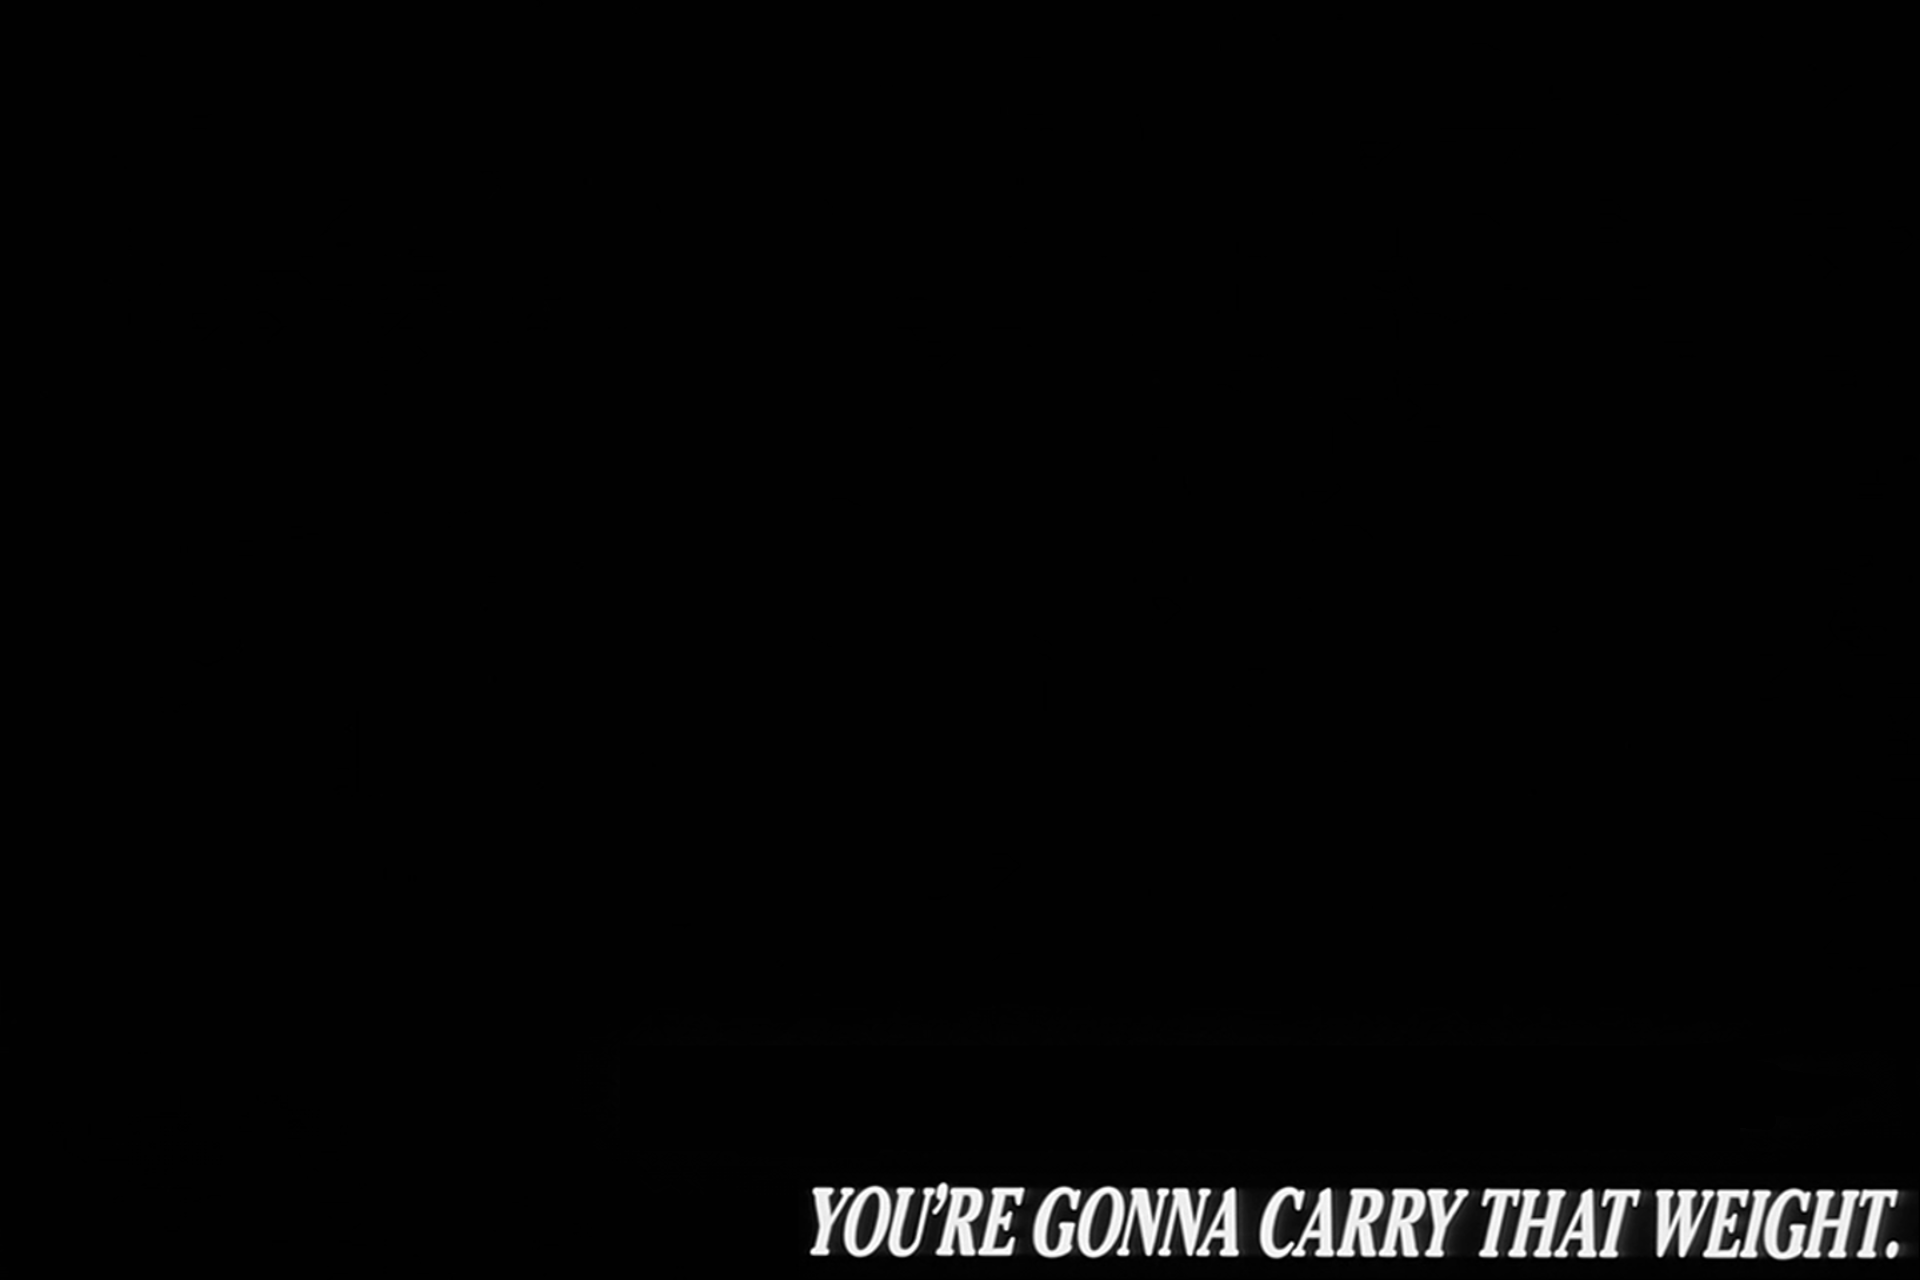 Cowboy Bebop Youre Gonna Carry That Weight Minimalism The Beatles Quote 1920x1280